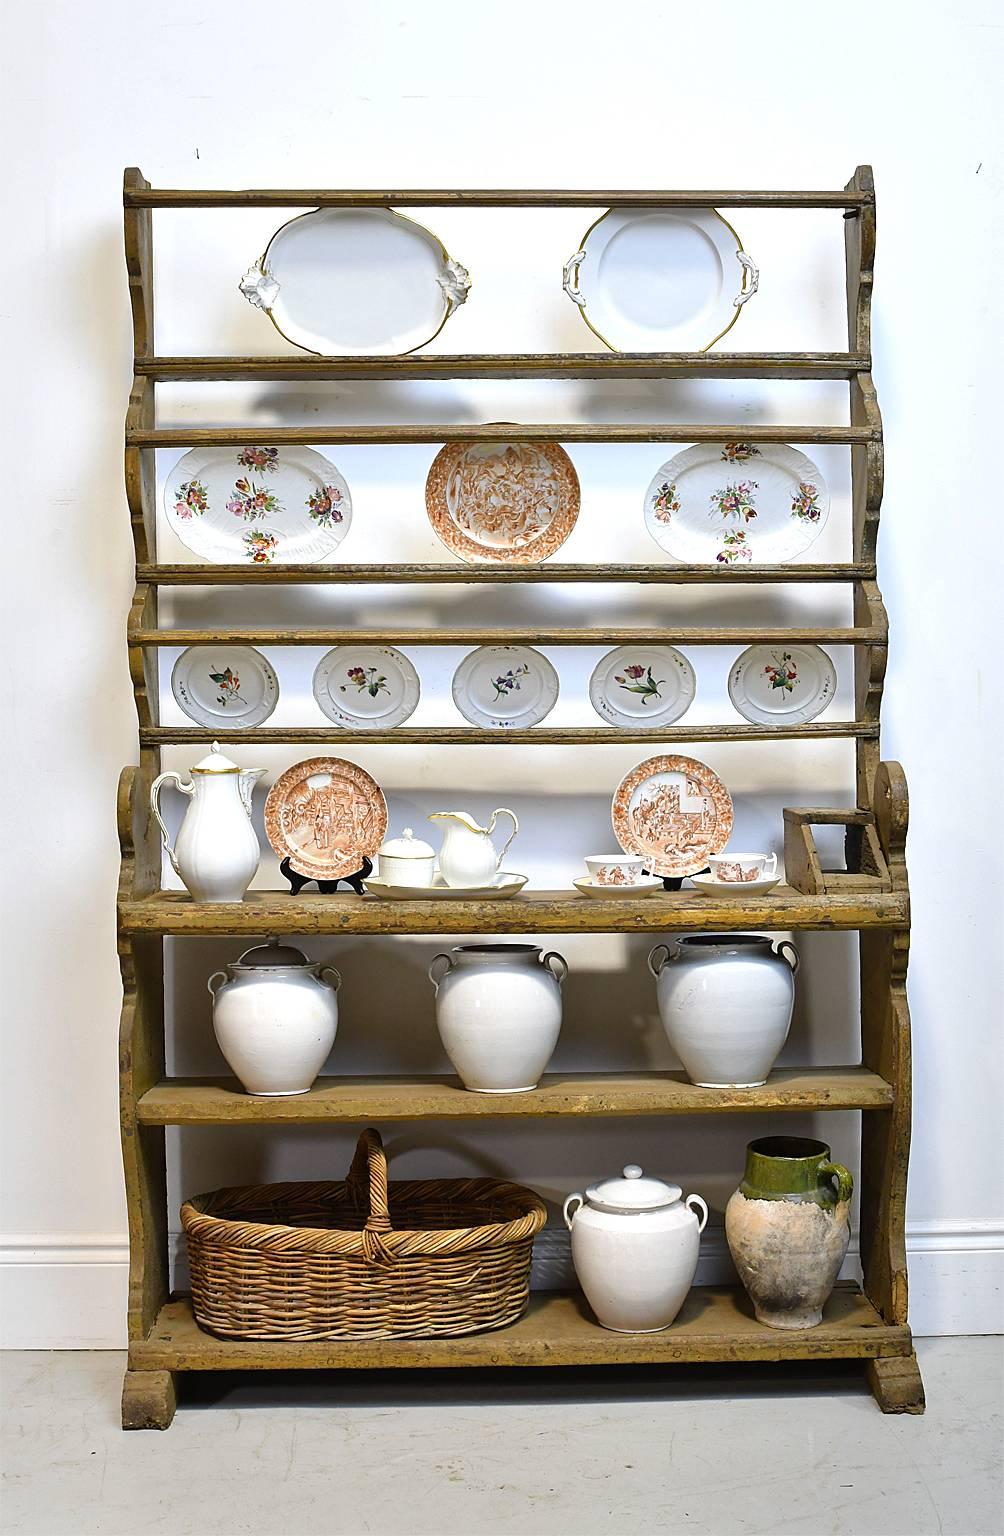 A very rare German Baroque cupboard with open bottom shelving below open dish rack offering enormous opportunity for showcasing a porcelain, glass collection or kitchenalia. Has a lovely carved silhouette and antique yellow ochre paint, that is